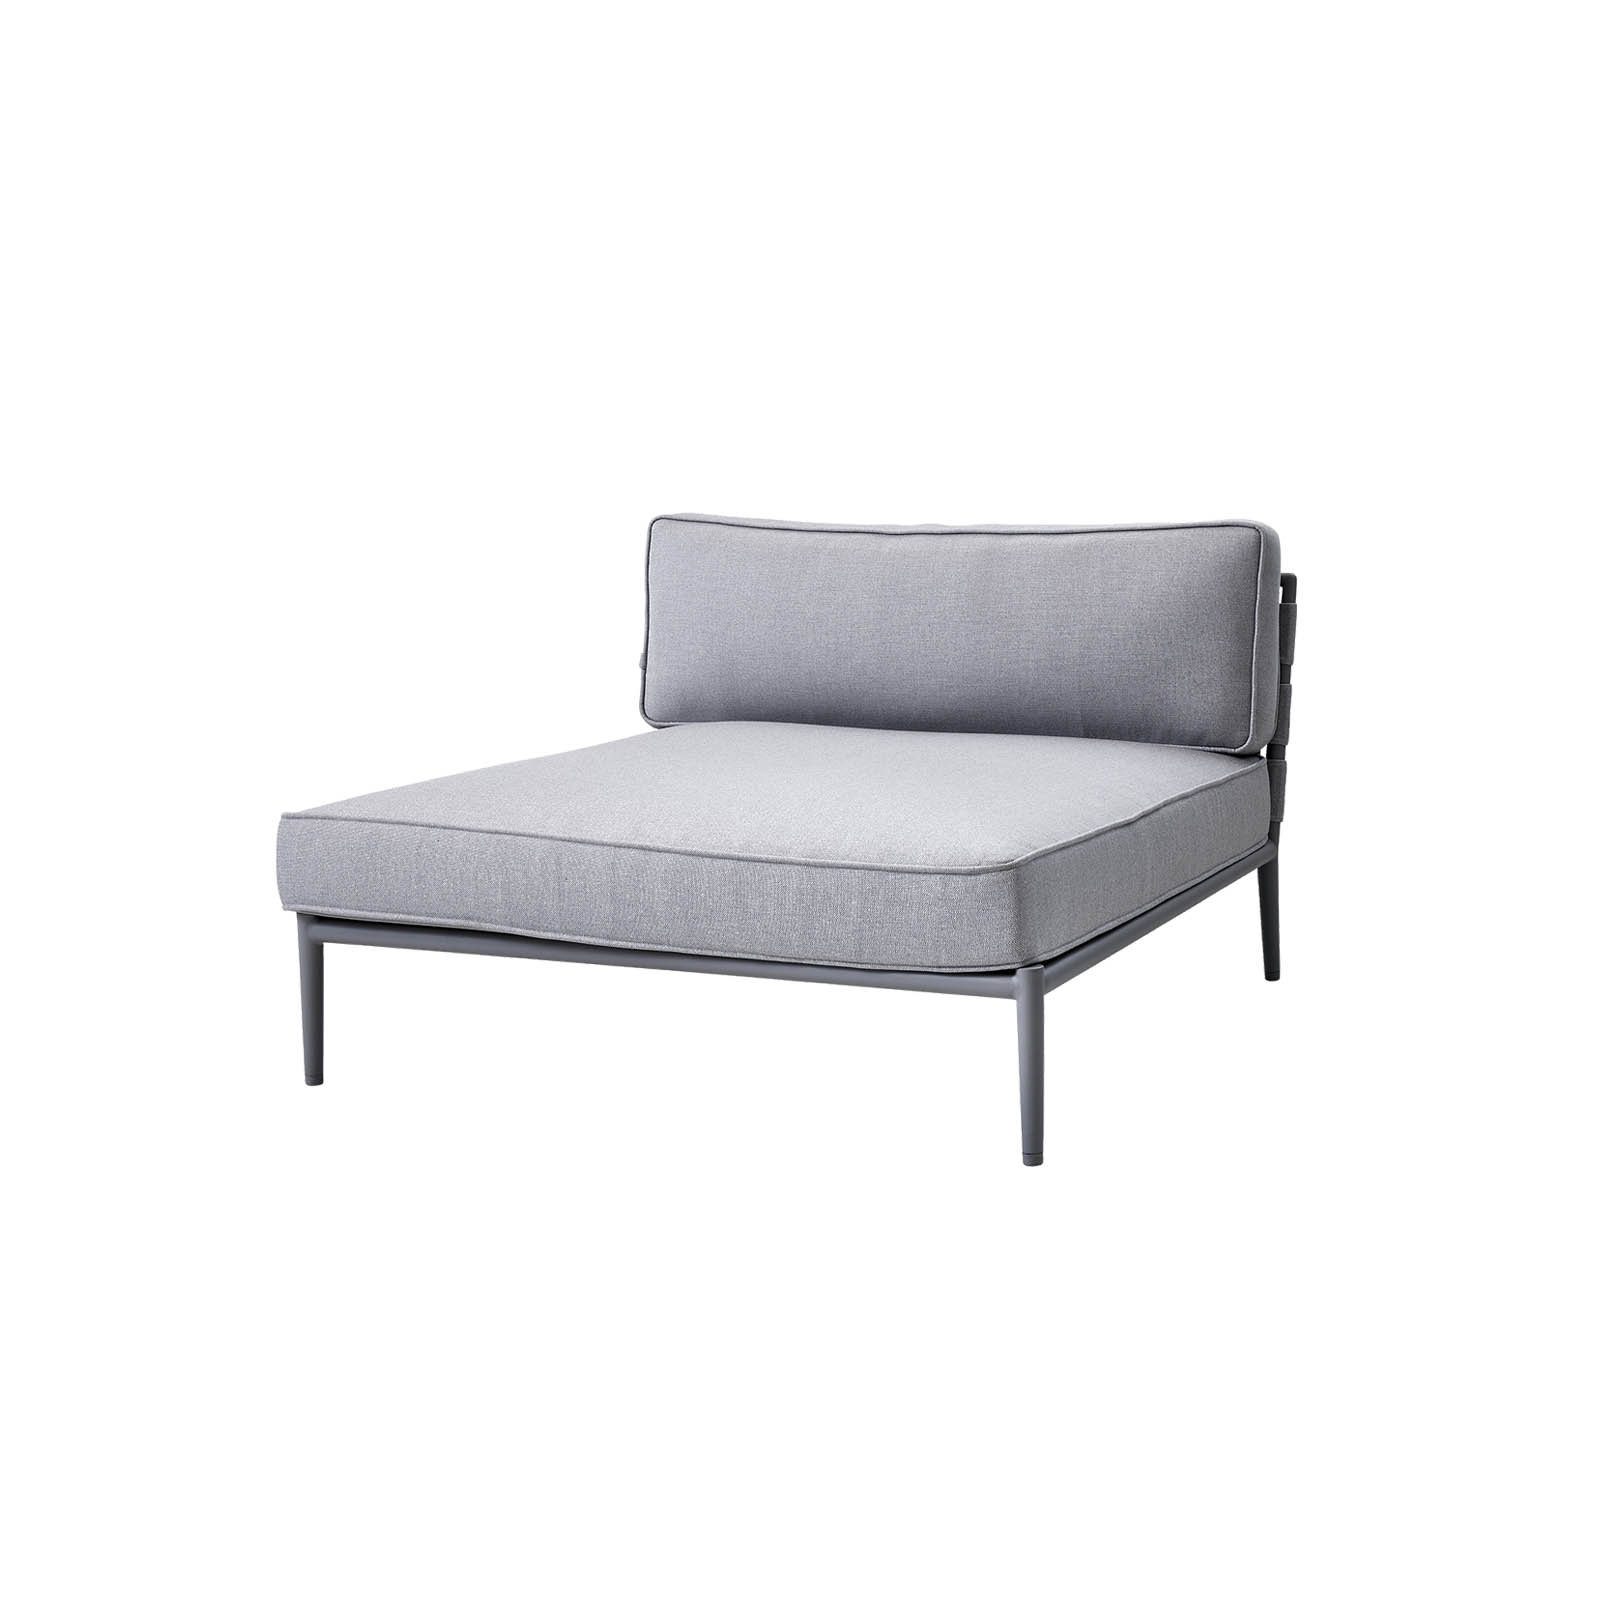 Conic daybed module aus Cane-line AirTouch mit QuickDry in Light Grey